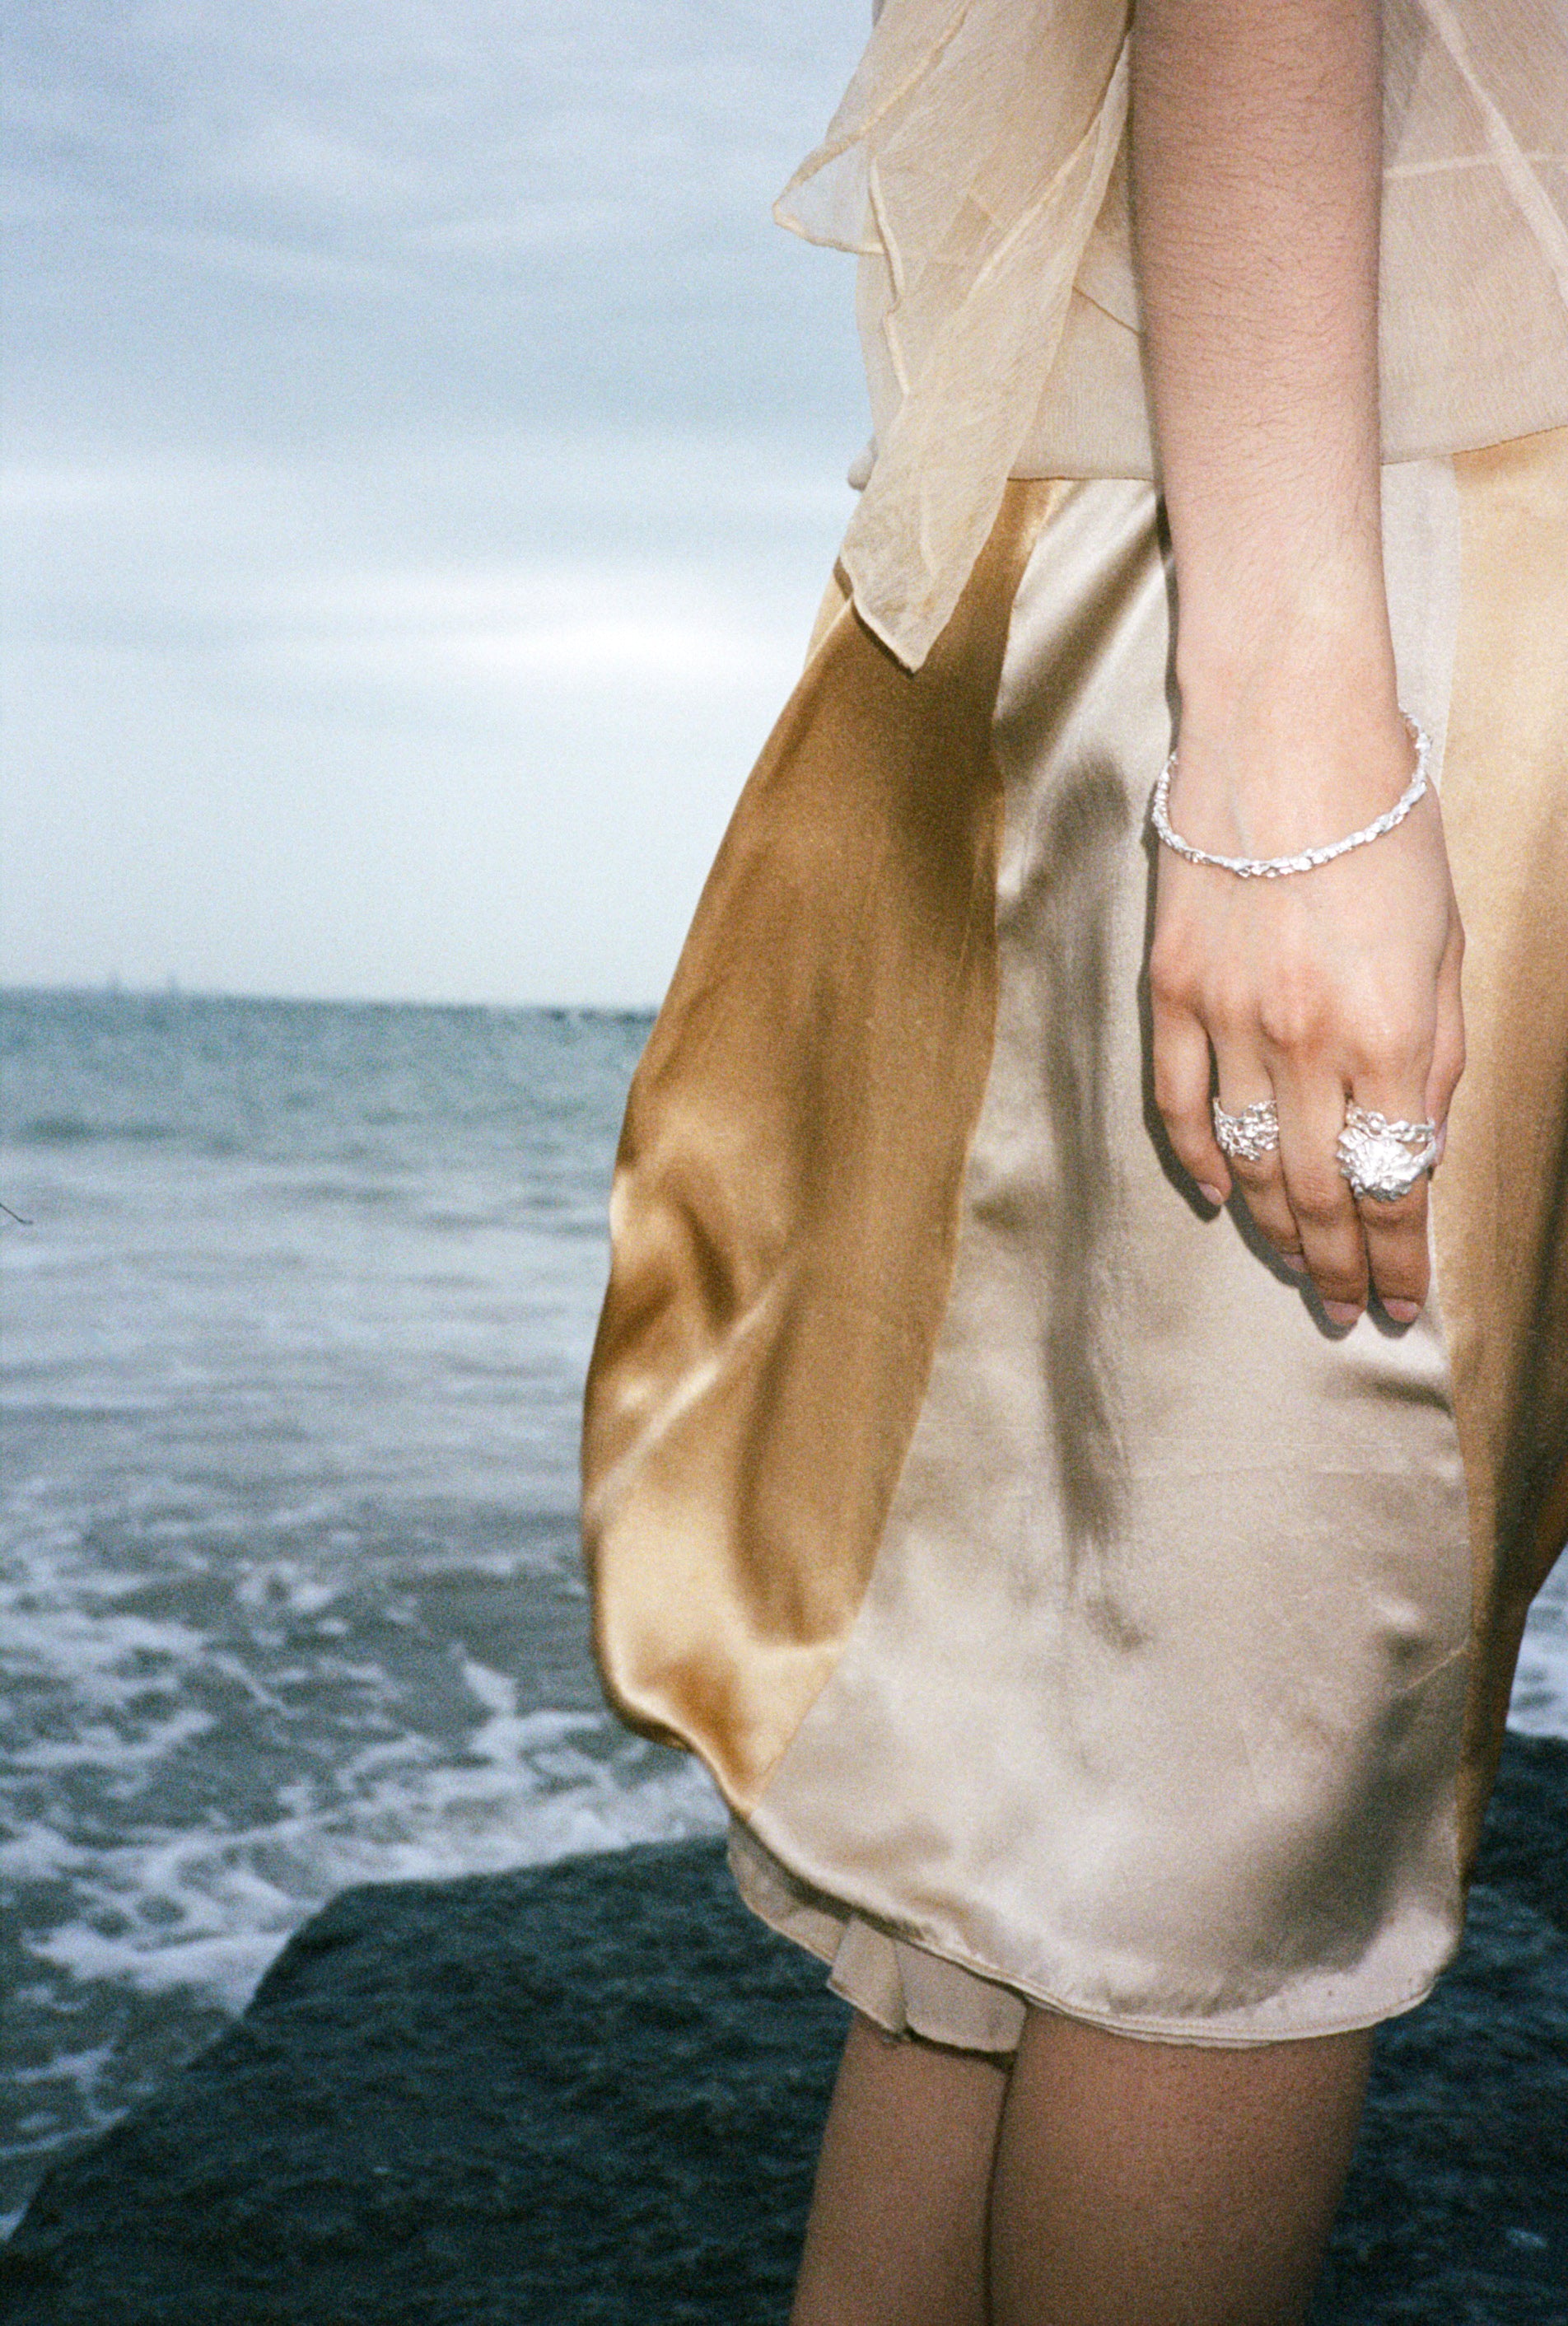 Unearthed- the limited edition broken seashell ring